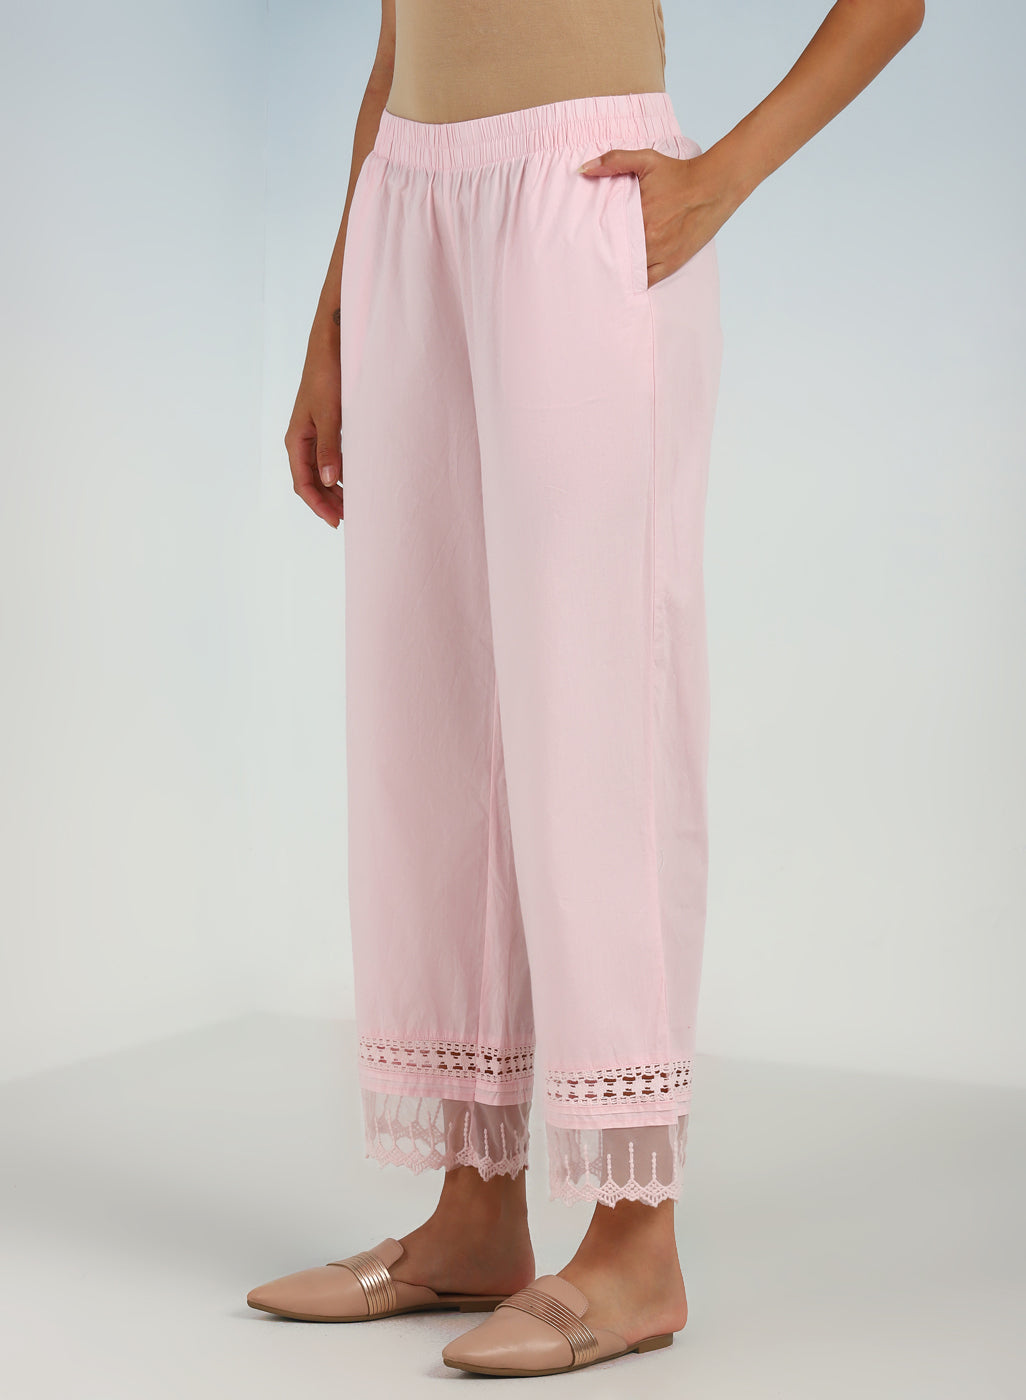 Buy Aaru Collection Women's Rayon Palazzo Pant Pink Color (Size L) at  Amazon.in